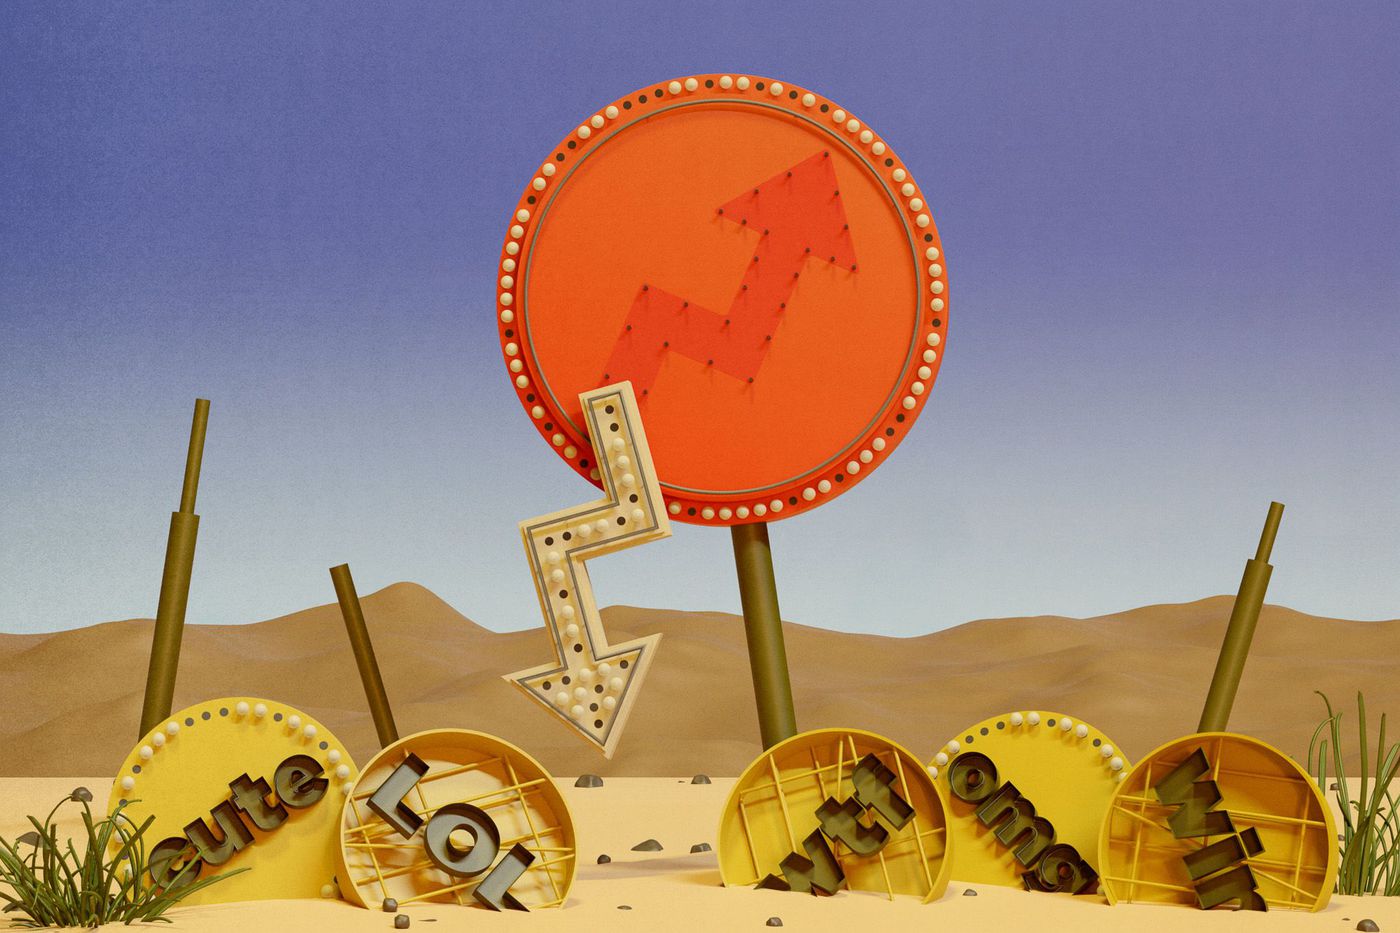 An old beat-up sign in the shape of the BuzzFeed logo icon in a desert setting surrounded by several smaller beat-up yellow signs that say “cute,” “lol,” “wtf,” and “omg” on them.